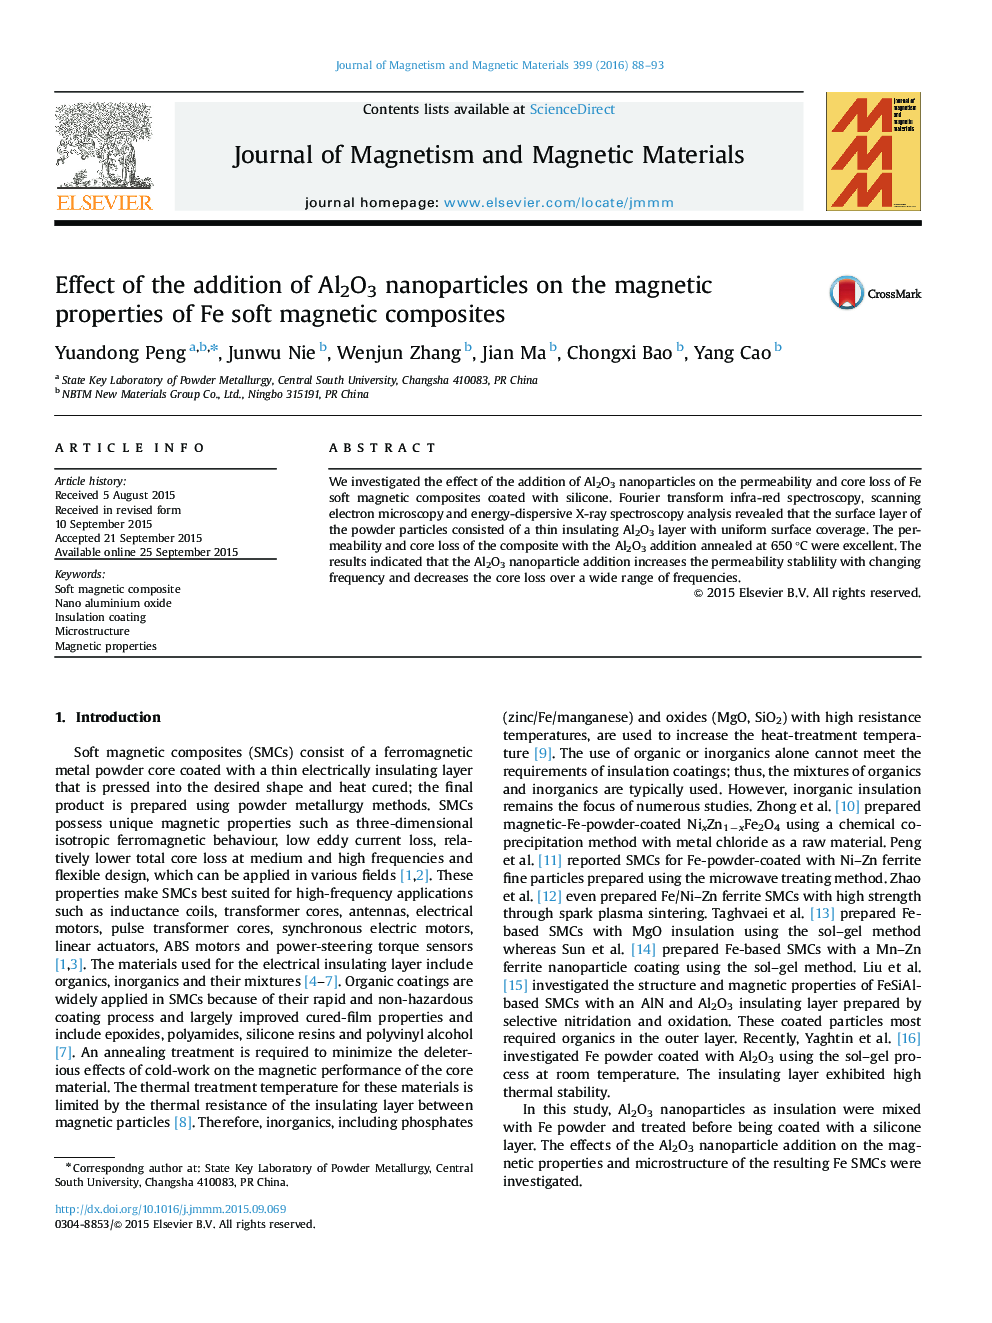 Effect of the addition of Al2O3 nanoparticles on the magnetic properties of Fe soft magnetic composites